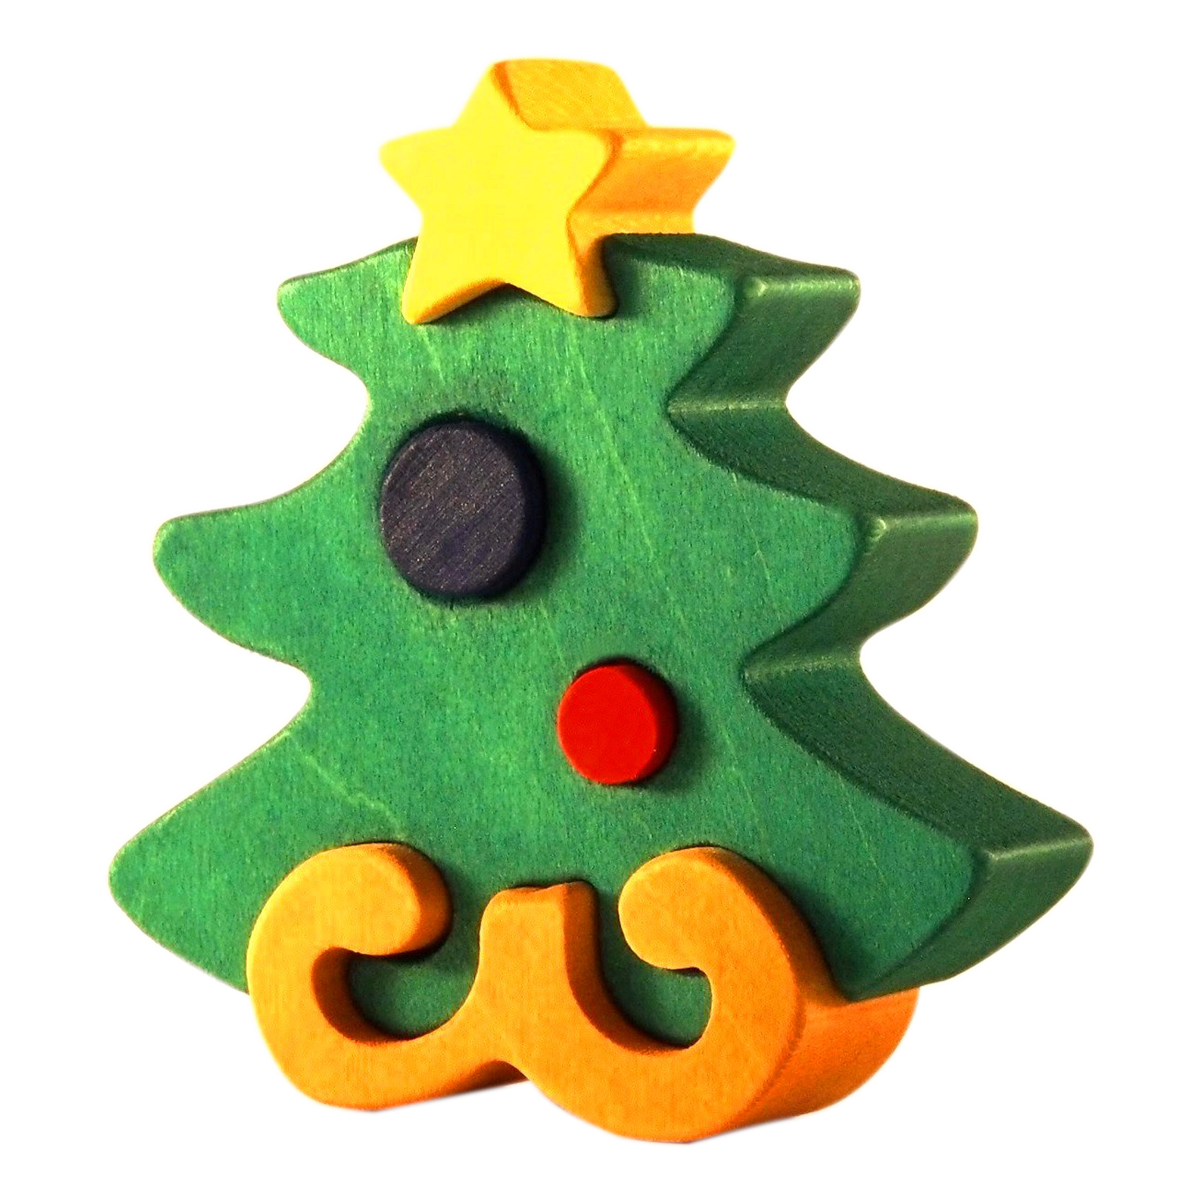 Green chrismas tree puzzle with a star at the top